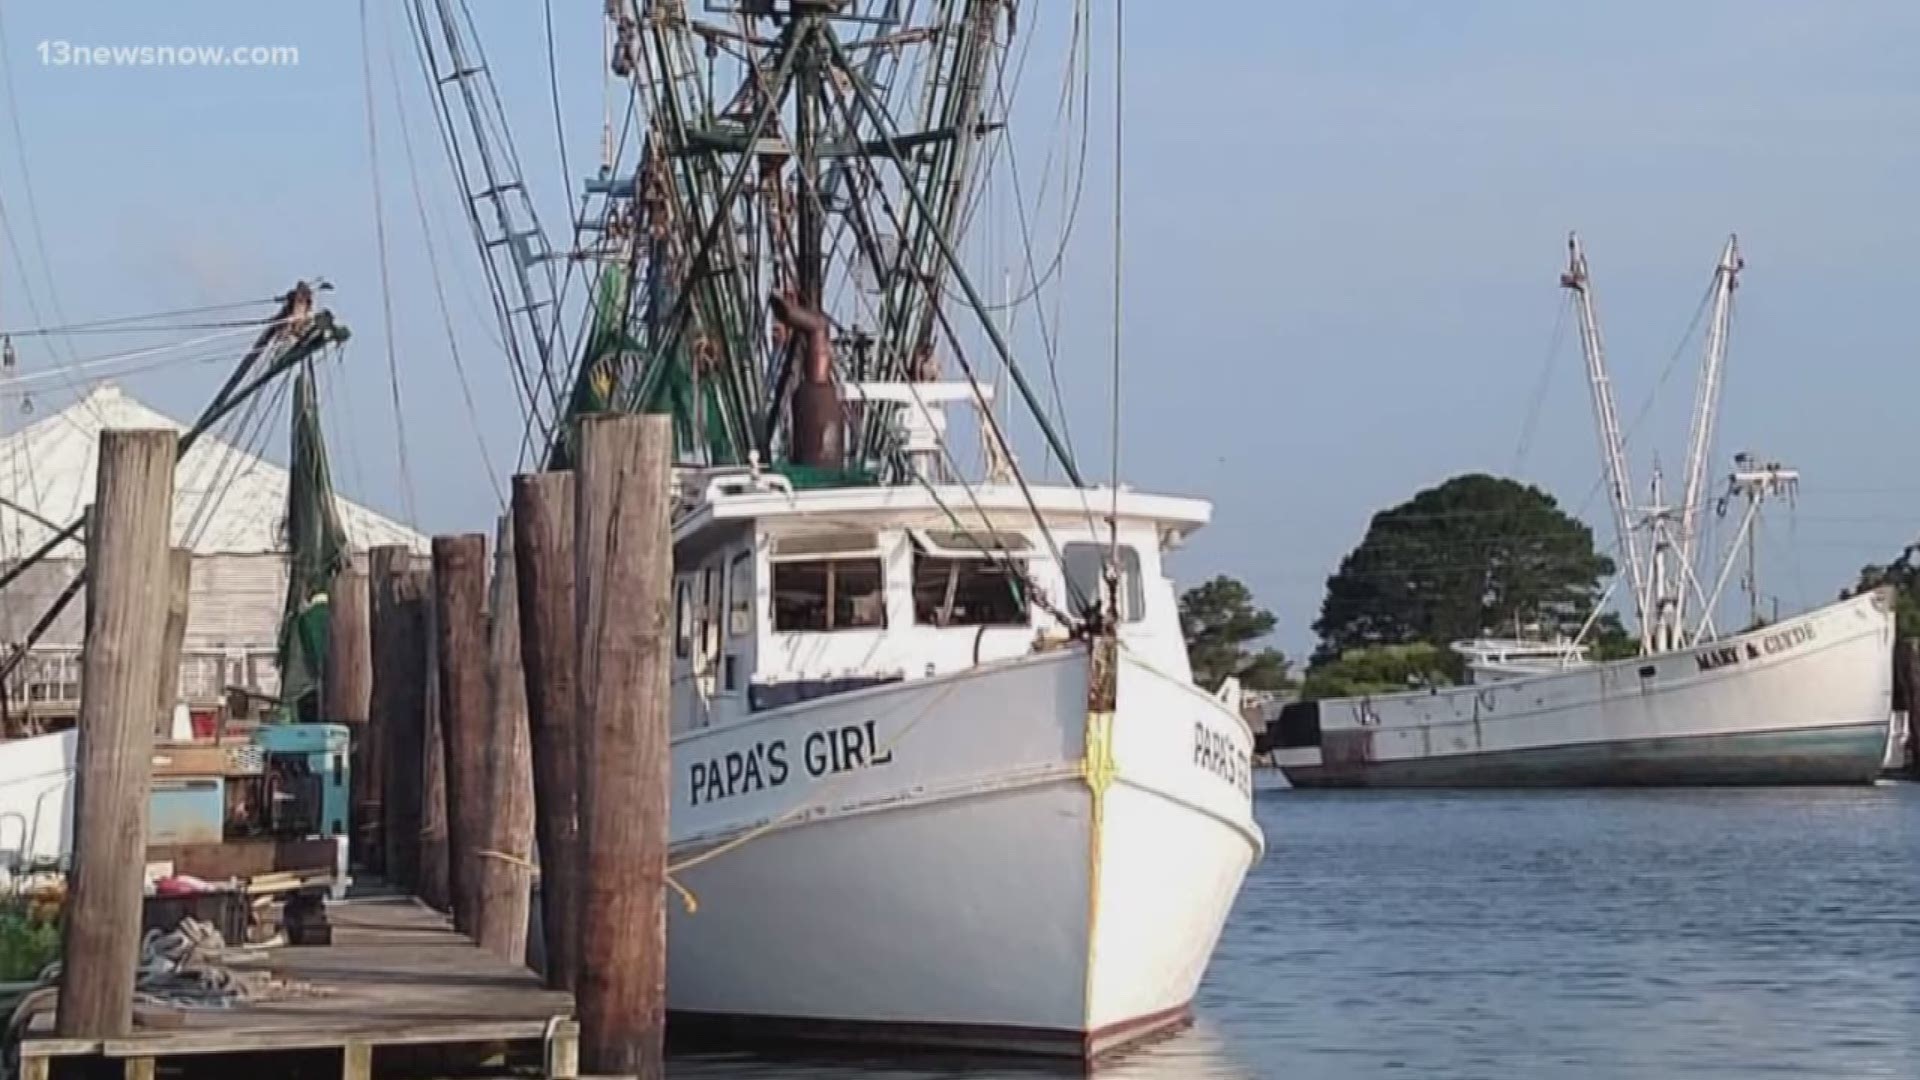 After the shrimp boat 'Papa's Girl' capsized, four families are struggling with the loss of loved ones.